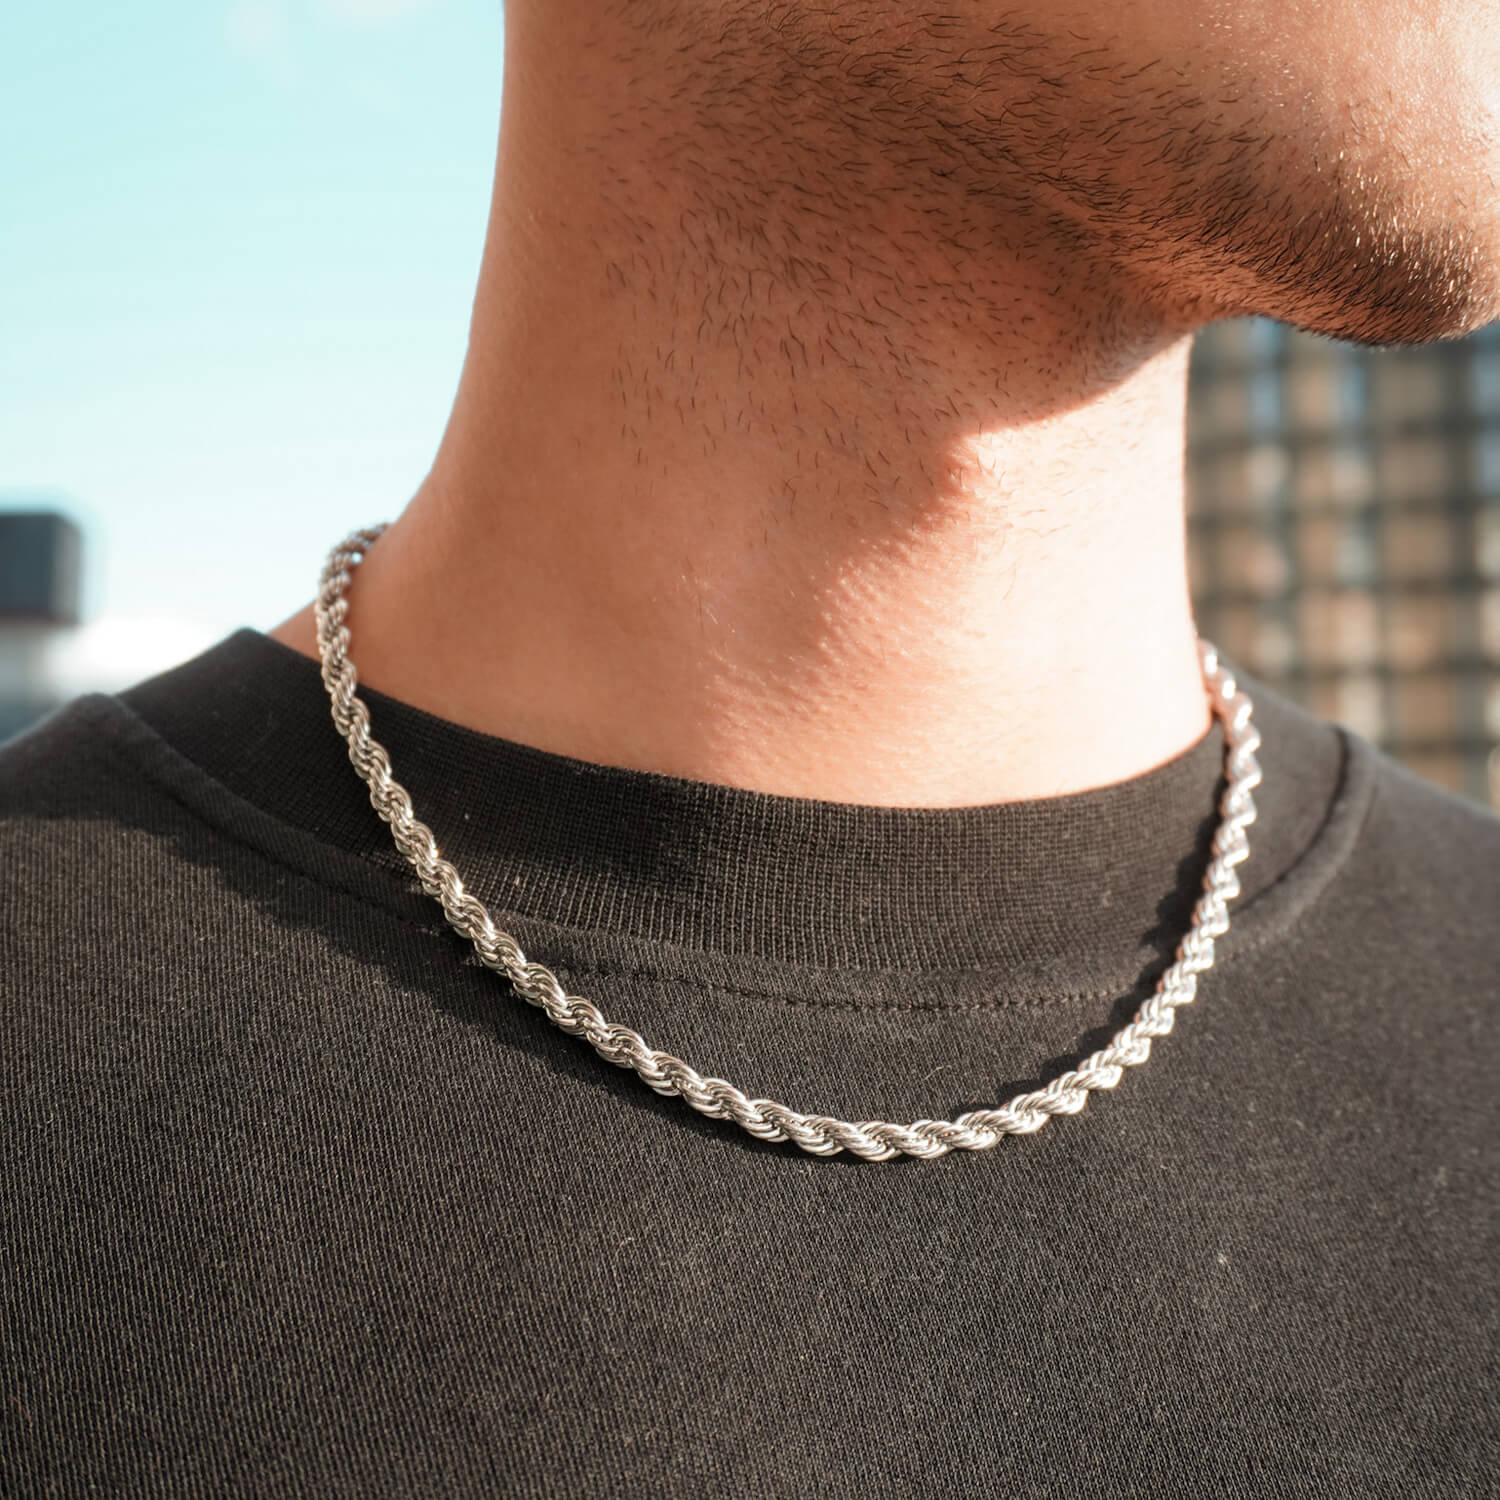 5mm silver rope chain on neck